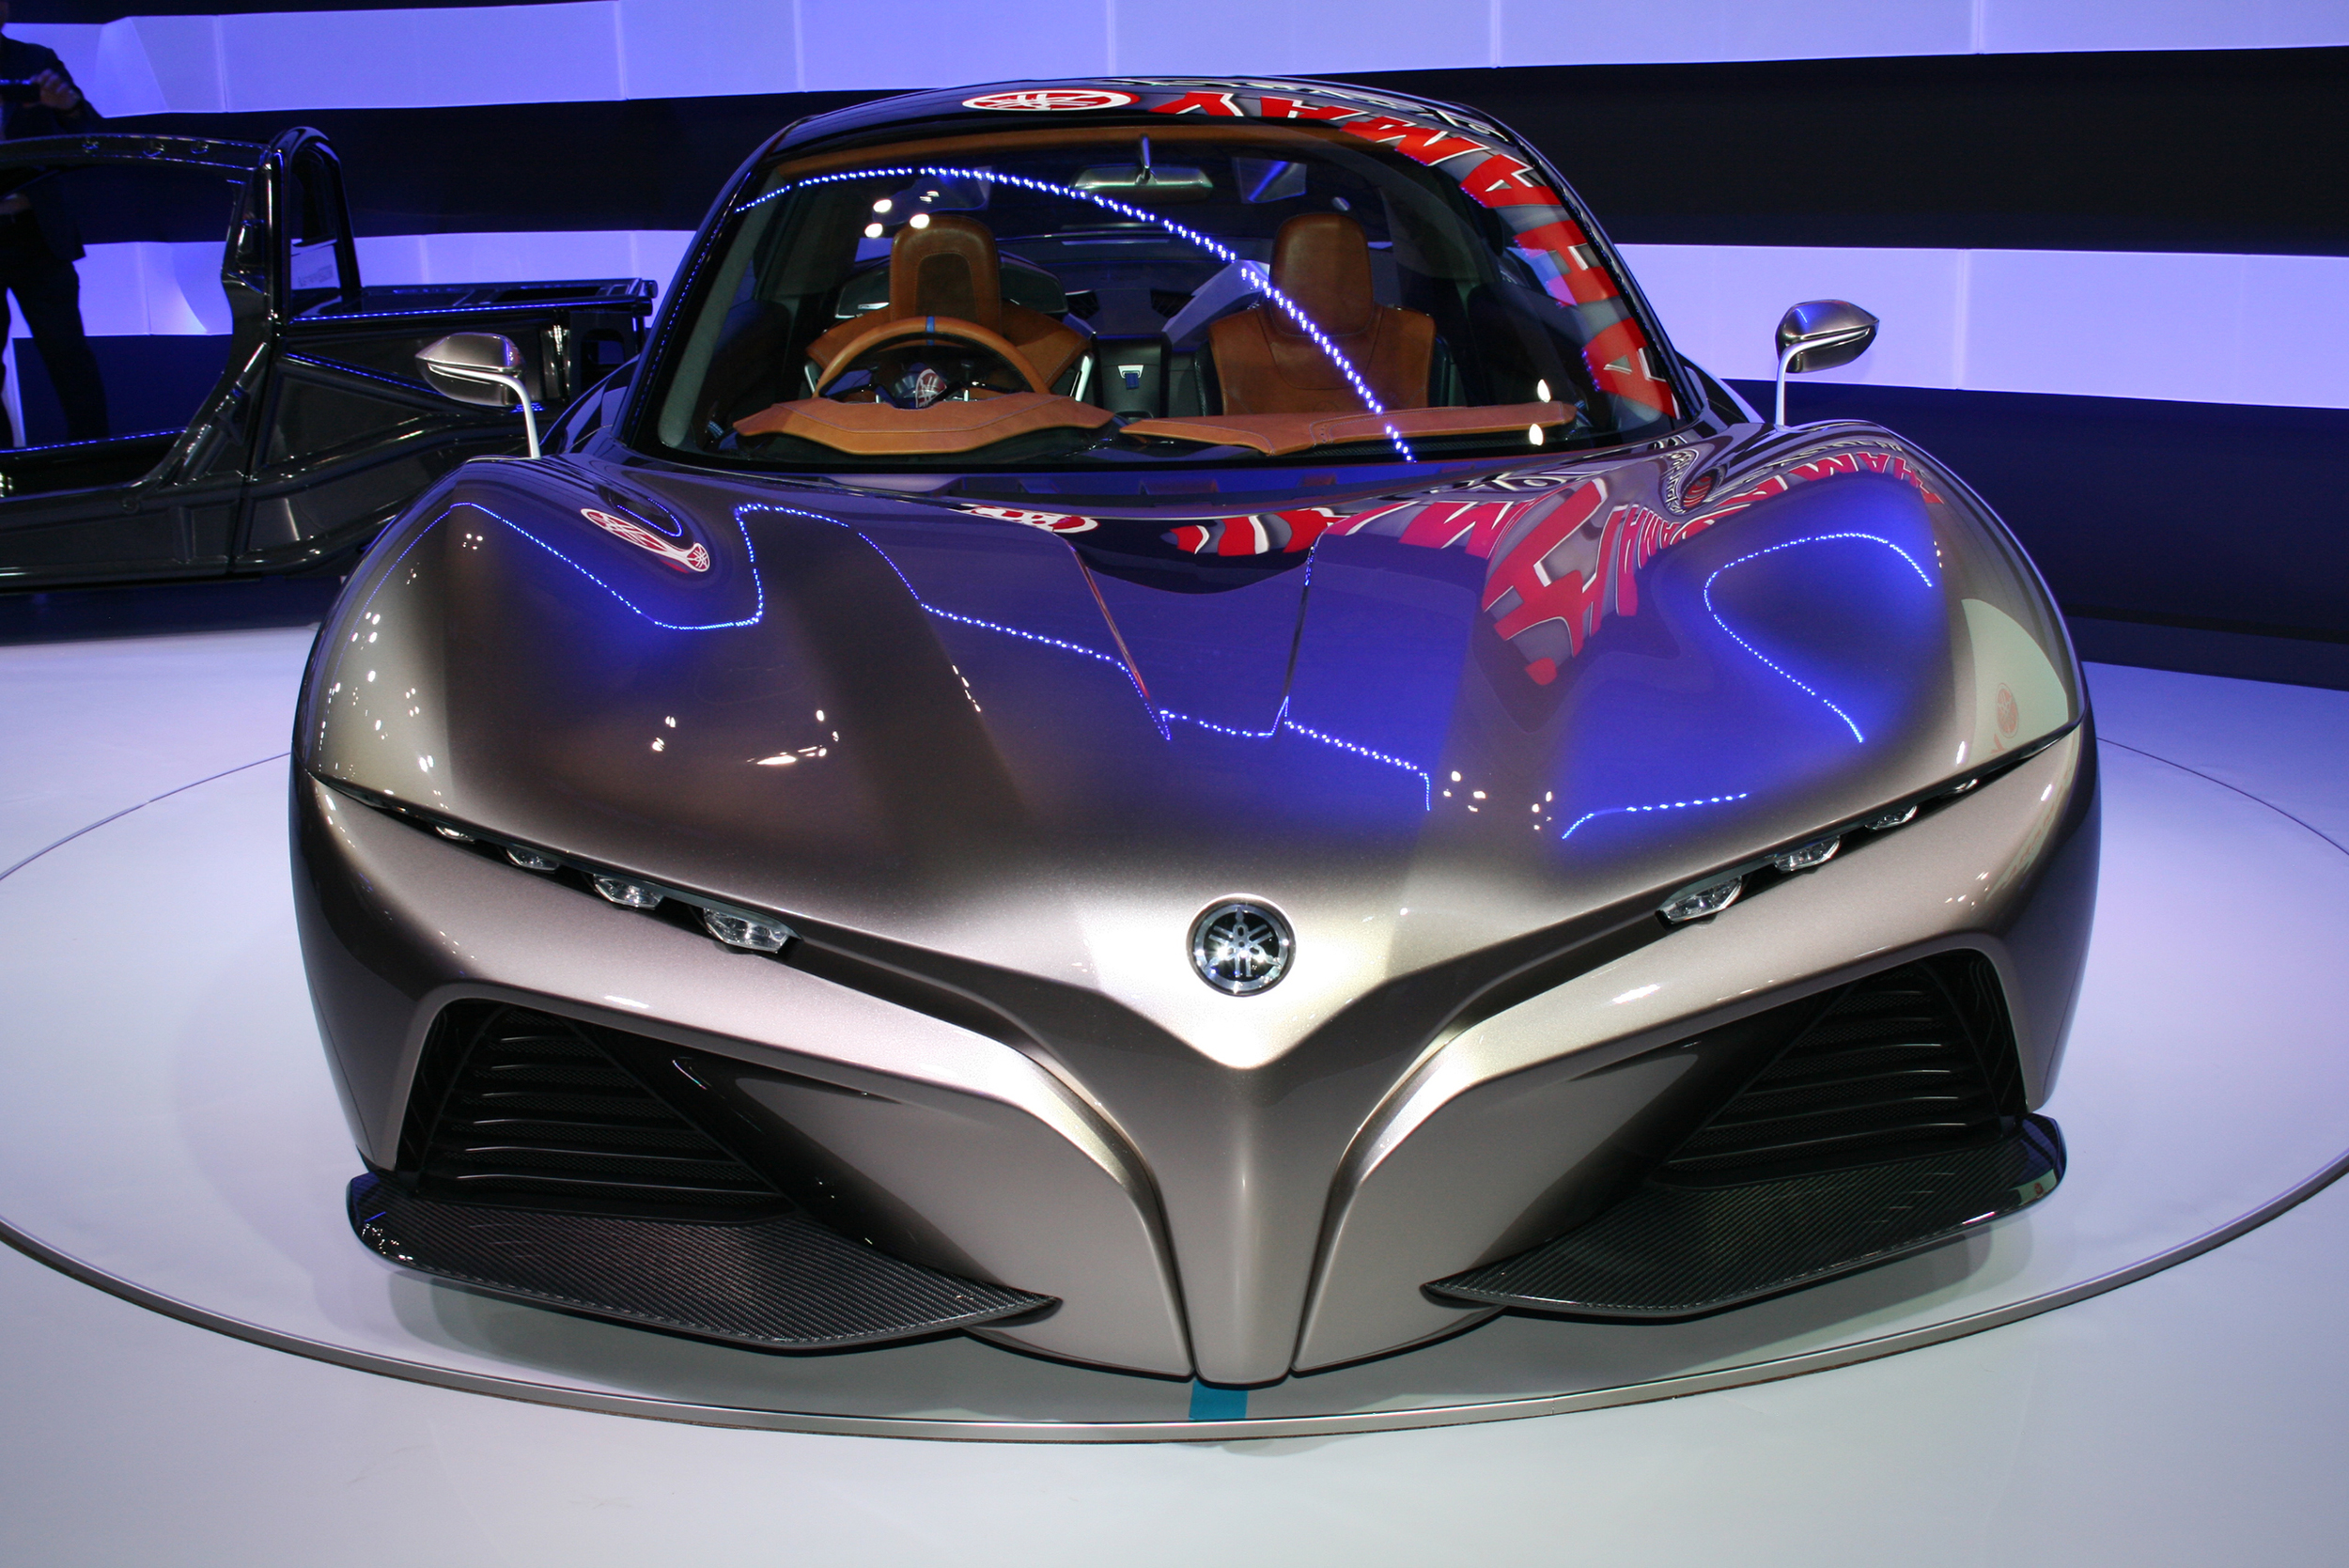 Yamaha reveals new sports car in Tokyo